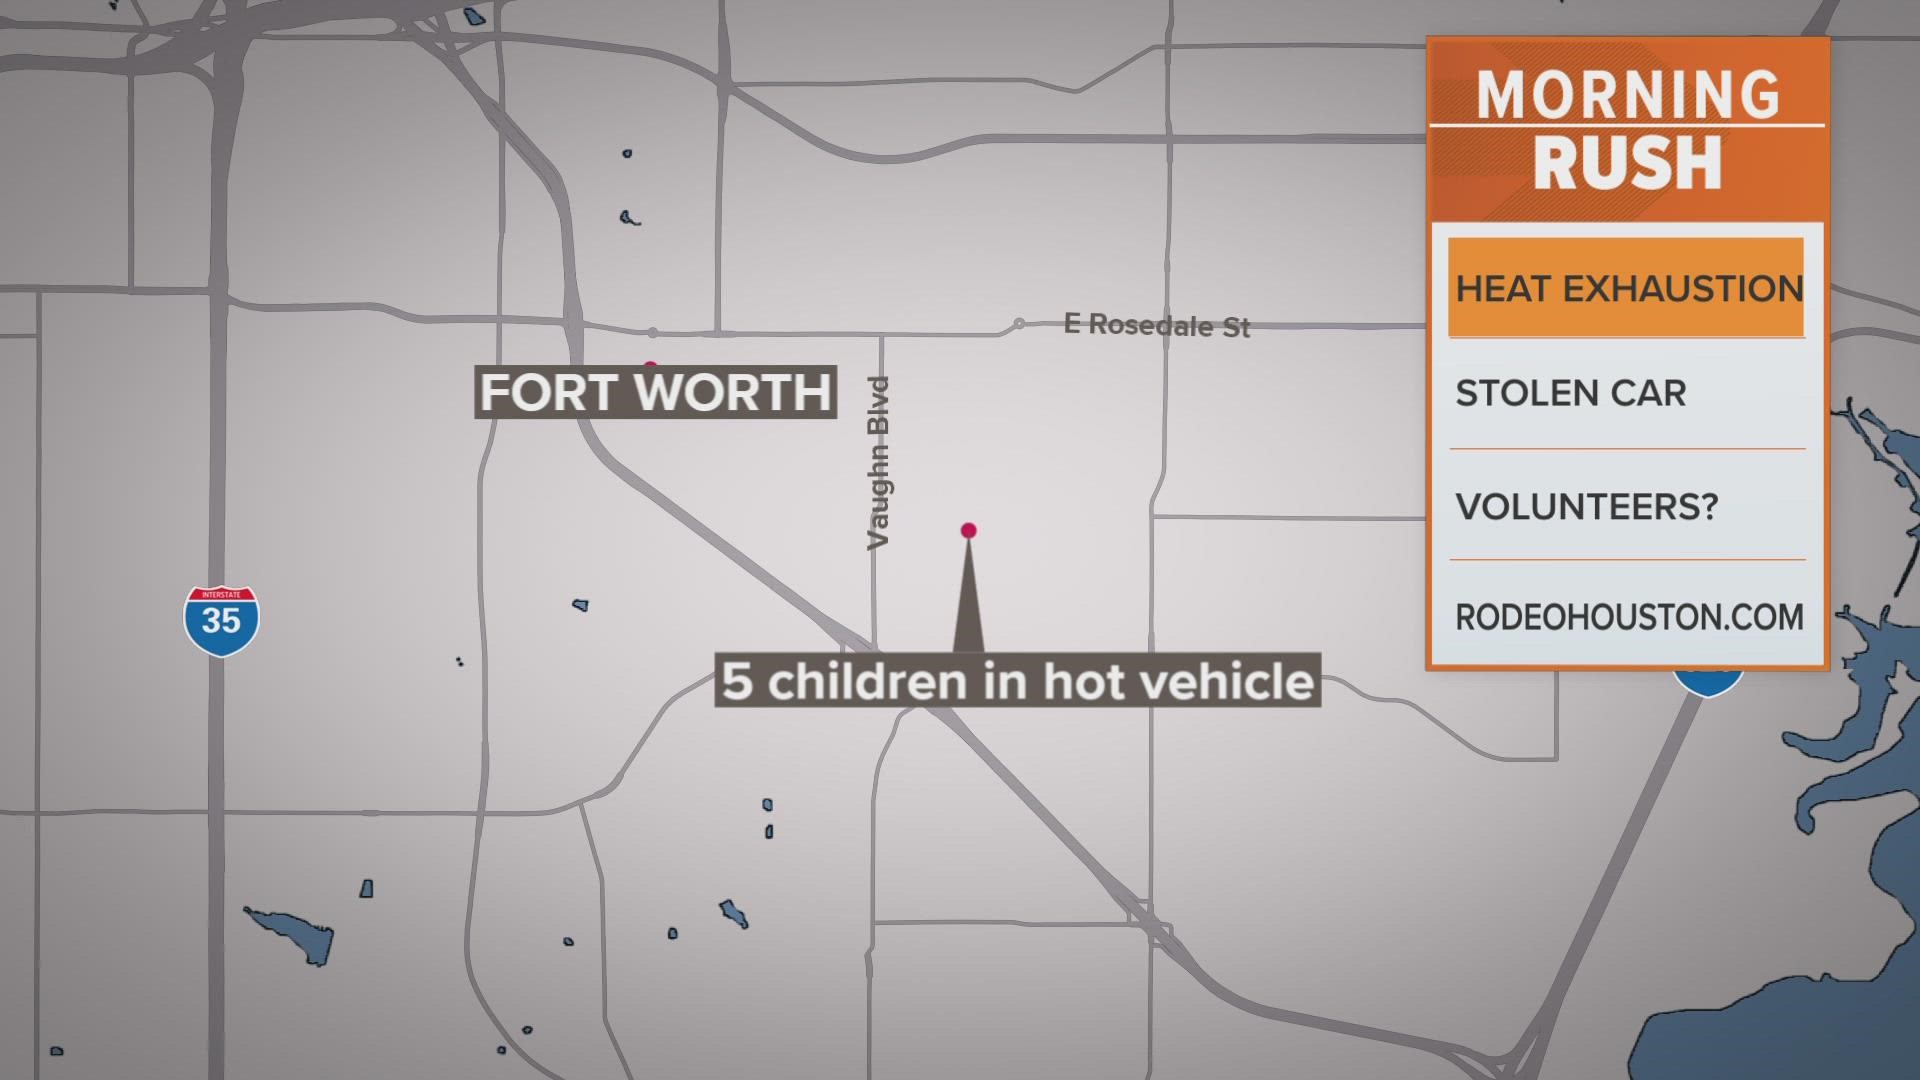 Fort Worth police say they got a call at about 8 p.m. about kids inside a vehicle. According to them, the children were either asleep or passed out.